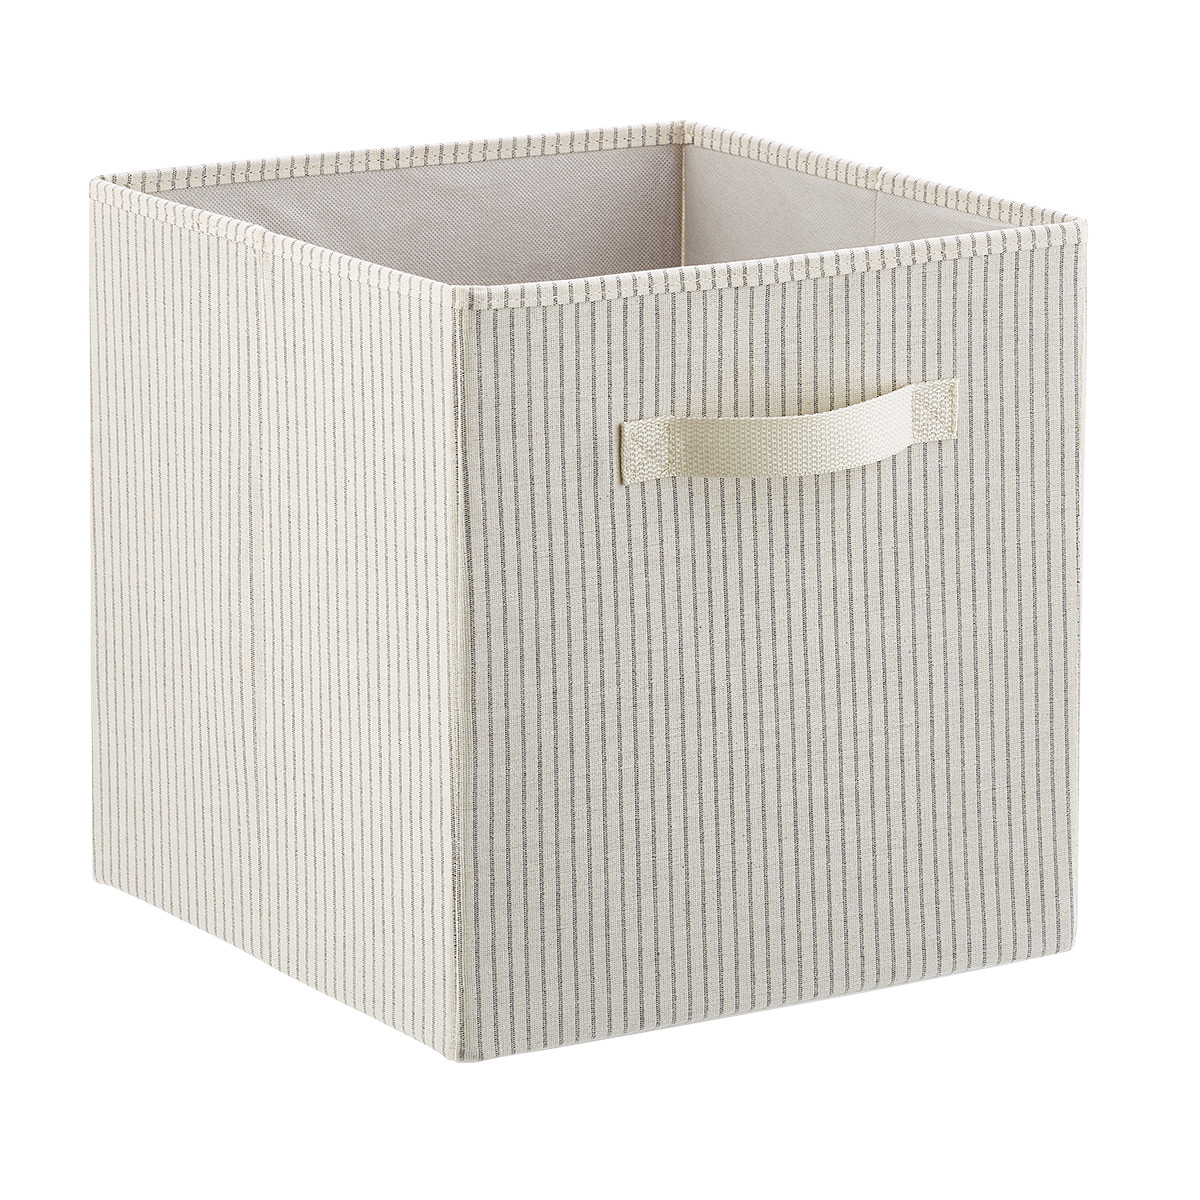 The Container Store Large Cube Grey Stripe